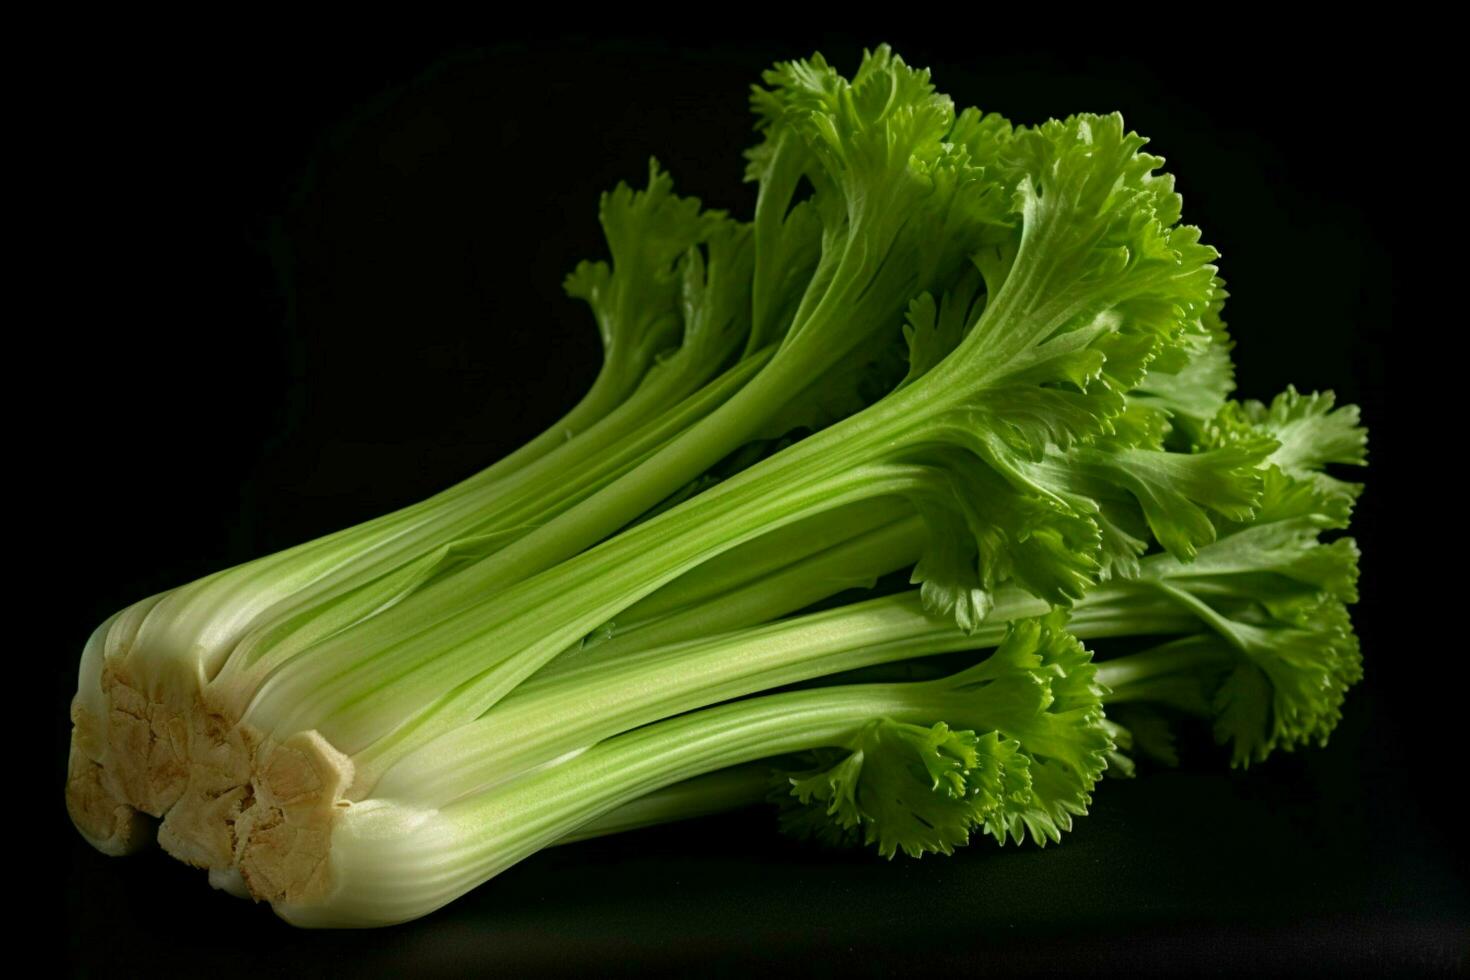 photo of celery with no background